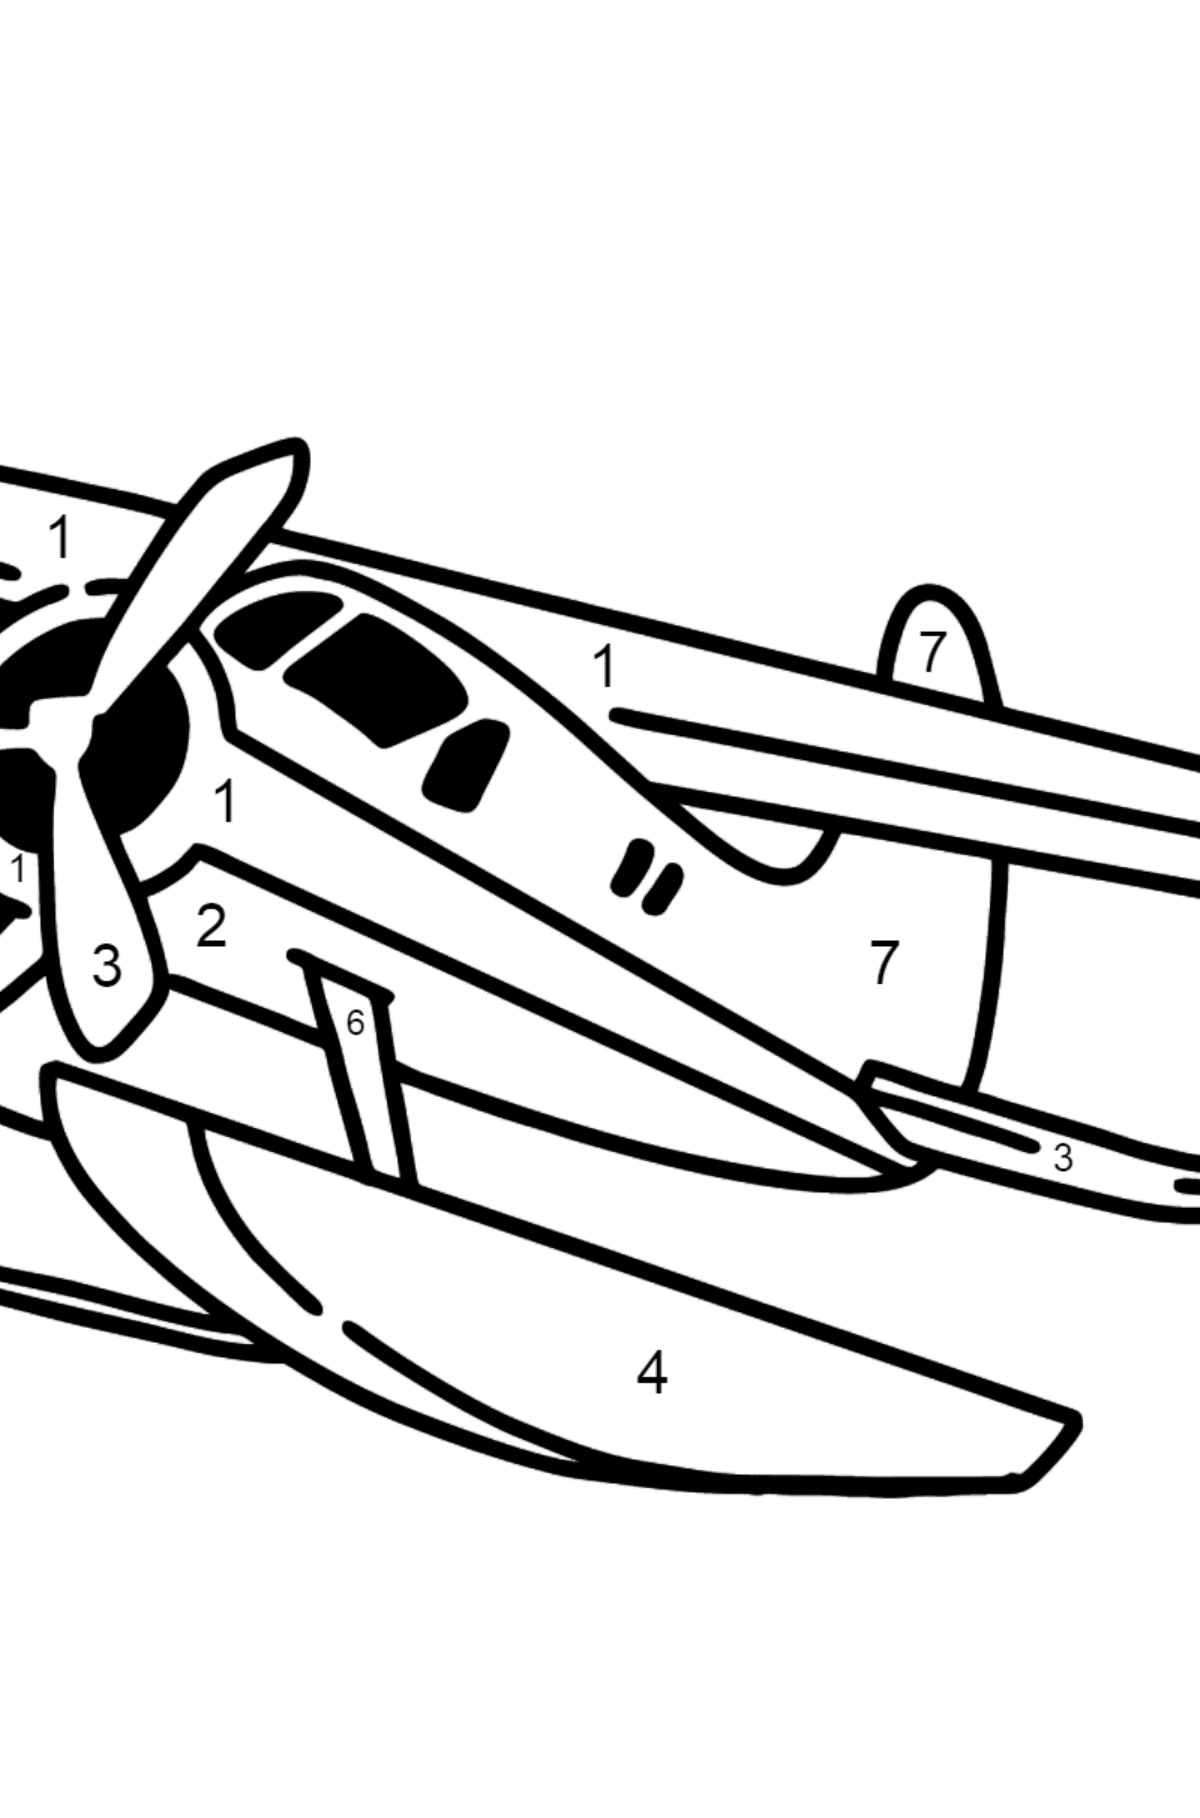 Jet Airplane BE-200 coloring page - Coloring by Numbers for Kids